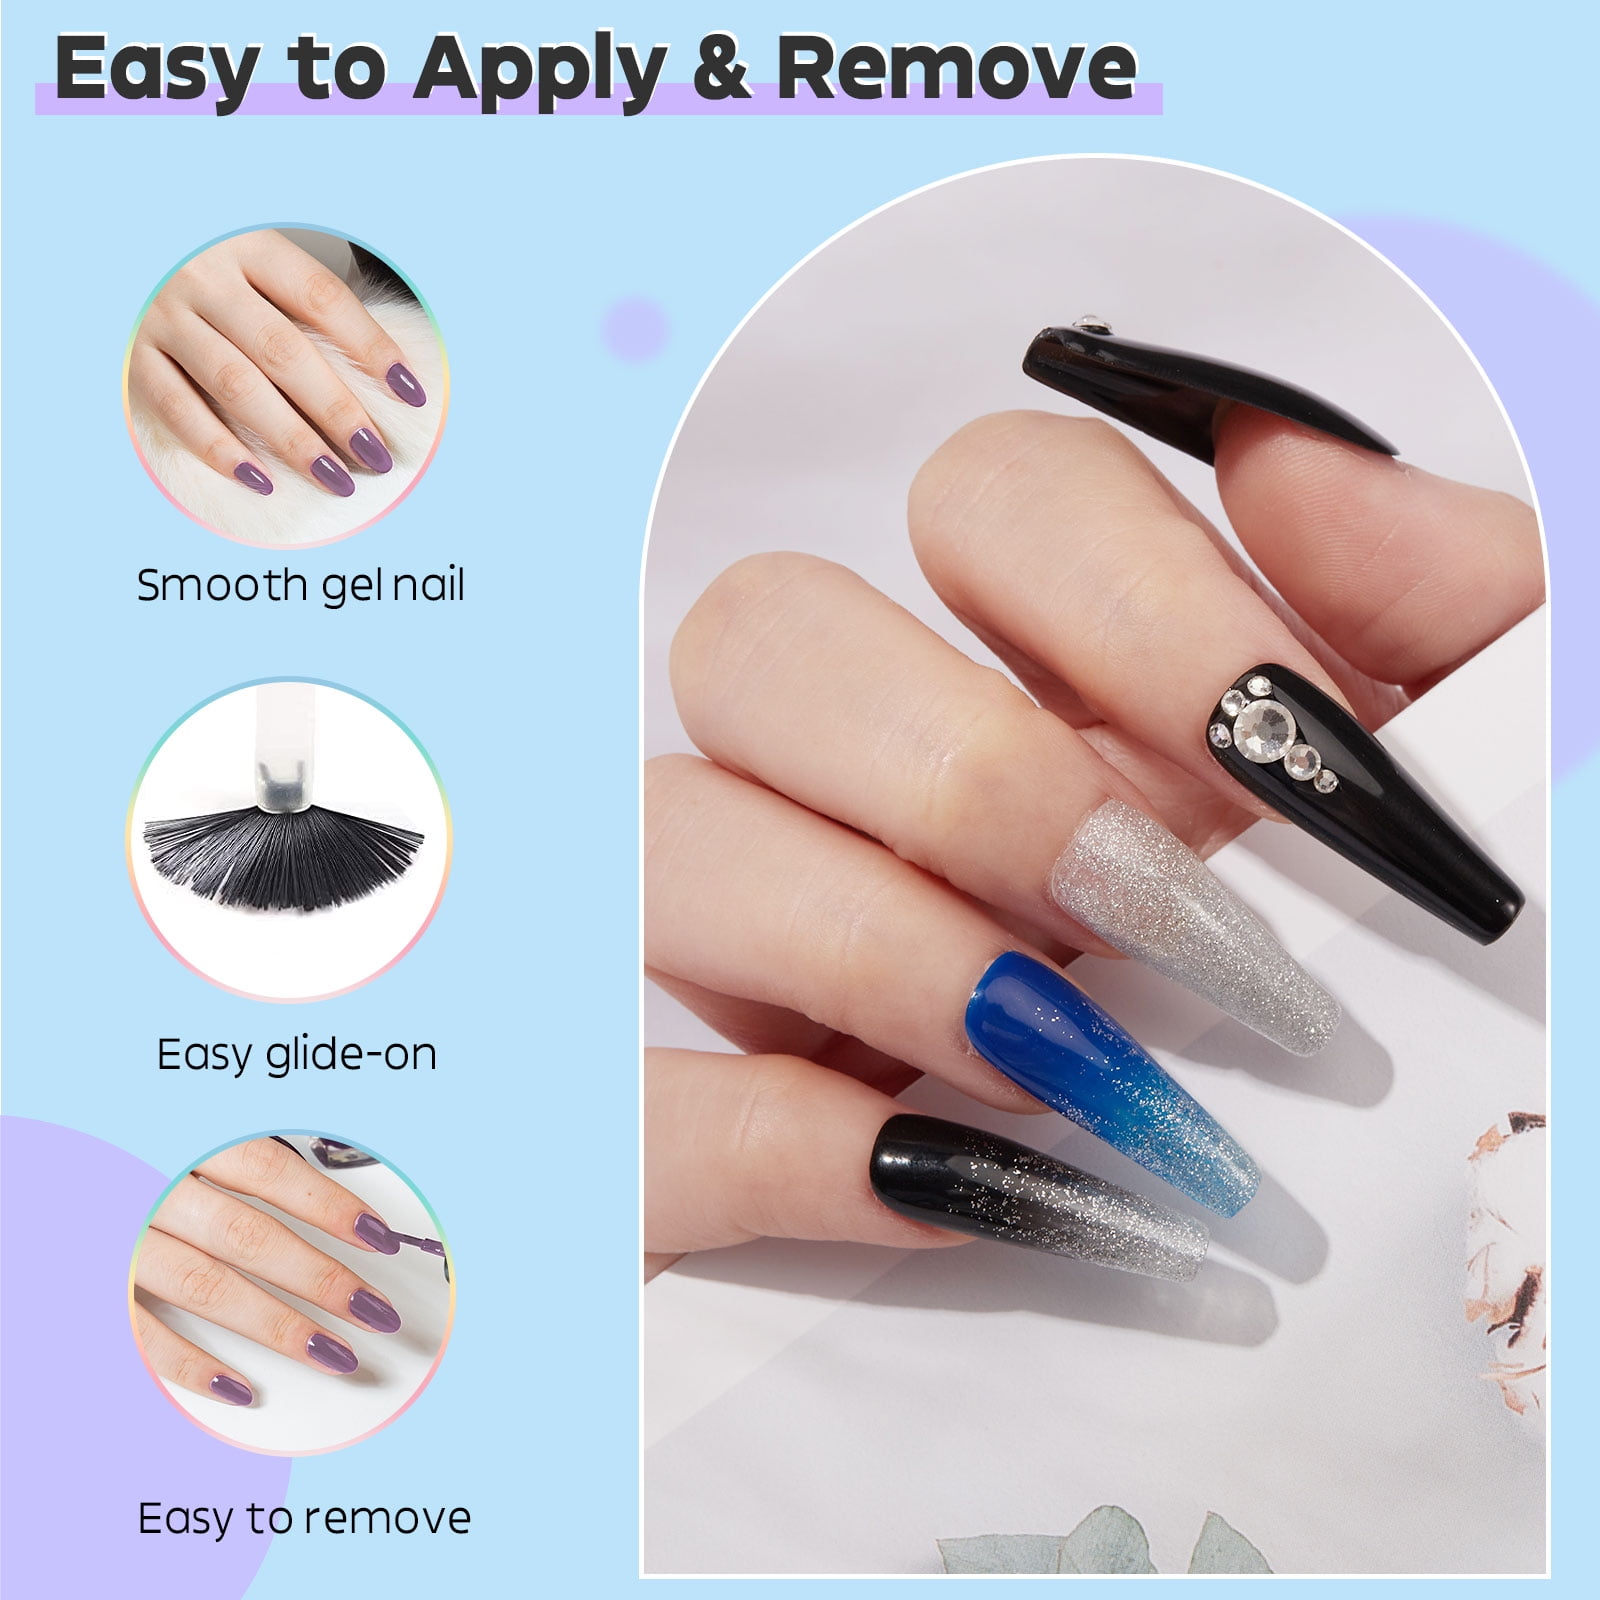 A Homemade DIY Substitute For a Nail Primer & Dehydrator - Easy Nail Tech